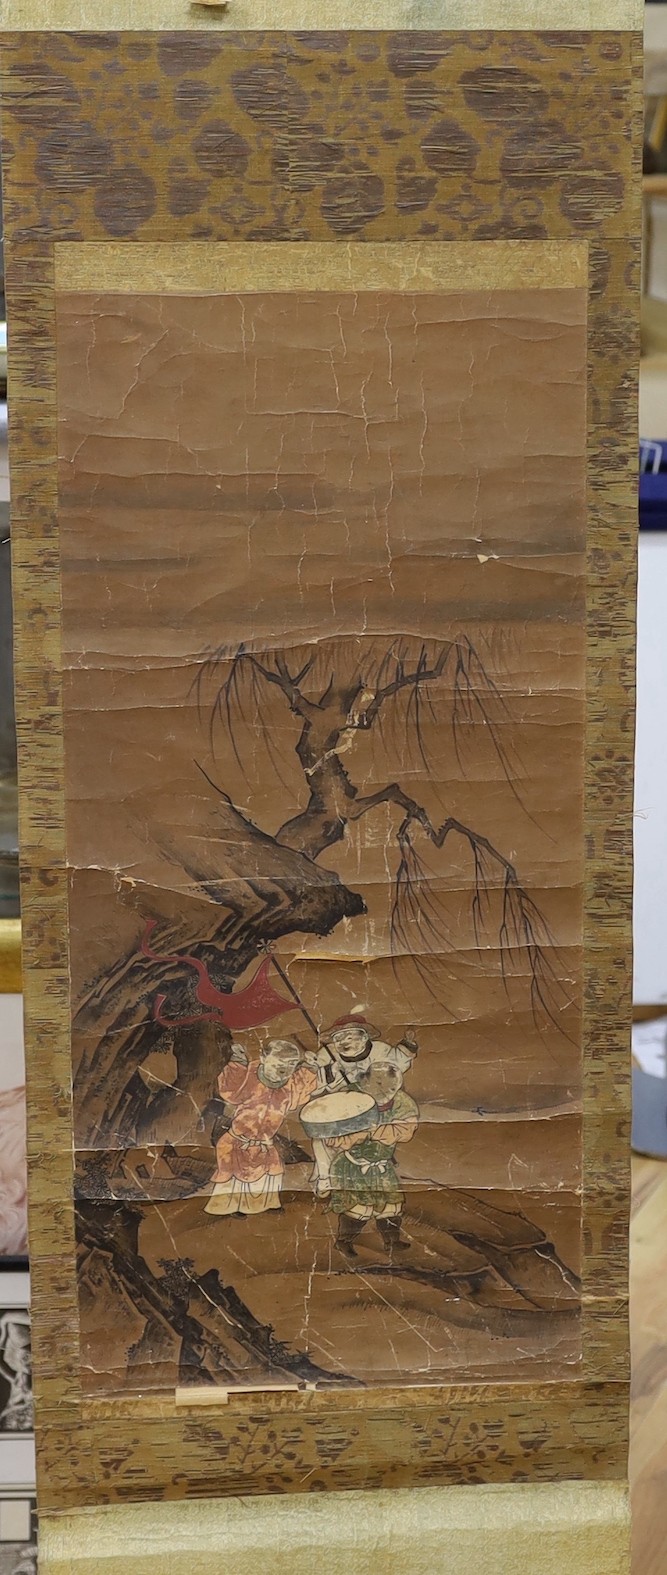 A 19th century Chinese scroll painting on paper of boys in a landscape, Image 69 cm X 31.5 cm